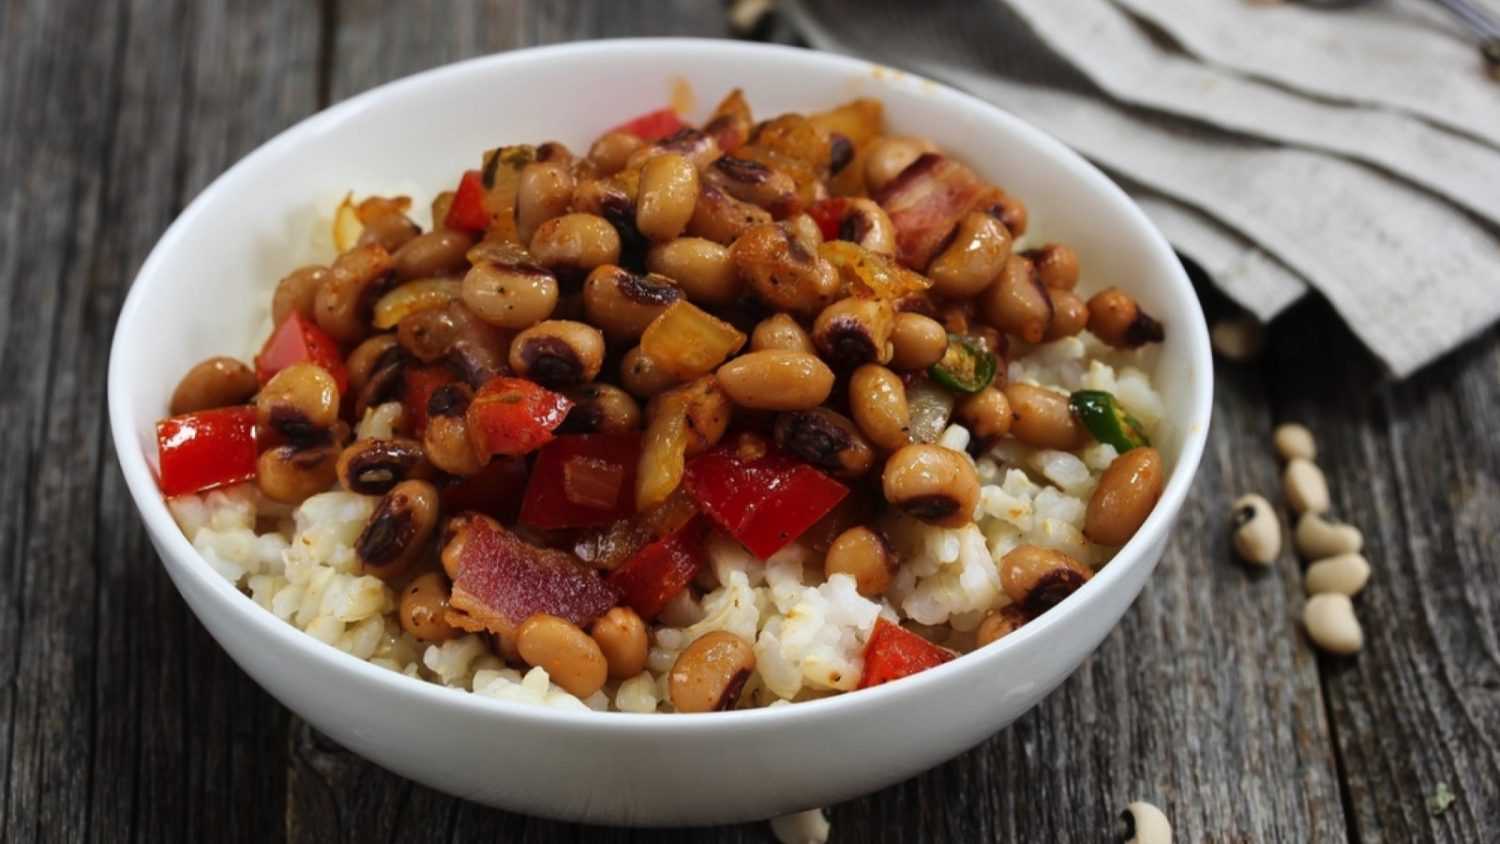 Homemade Southern Hoppin John or Carolina peas and rice served in a white bowl